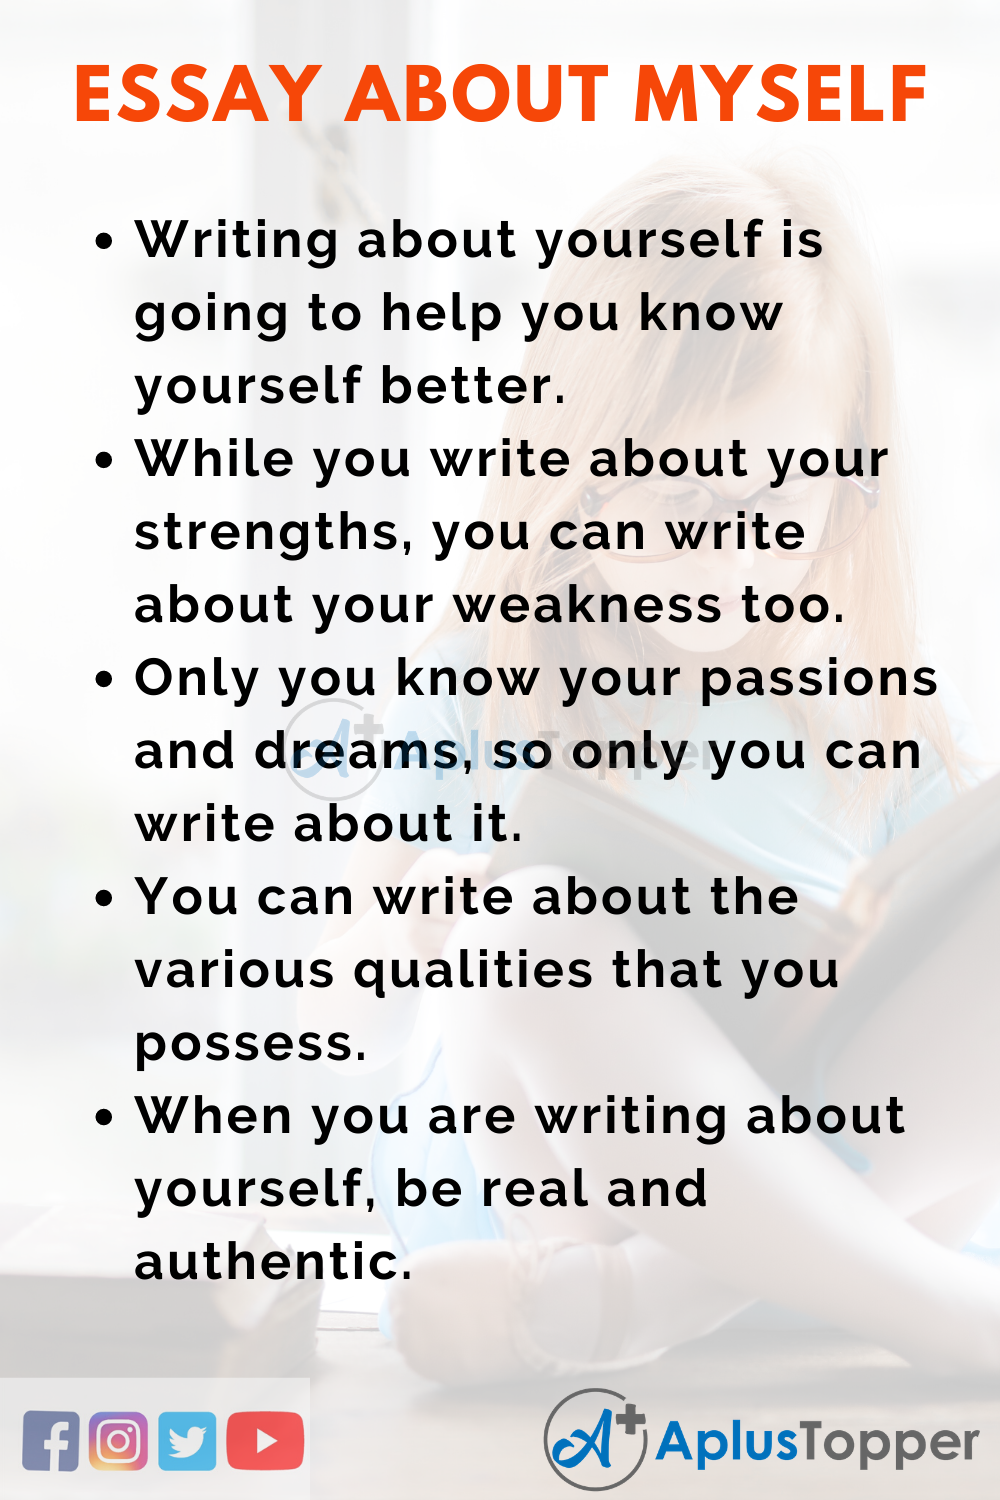 how to write about myself essay